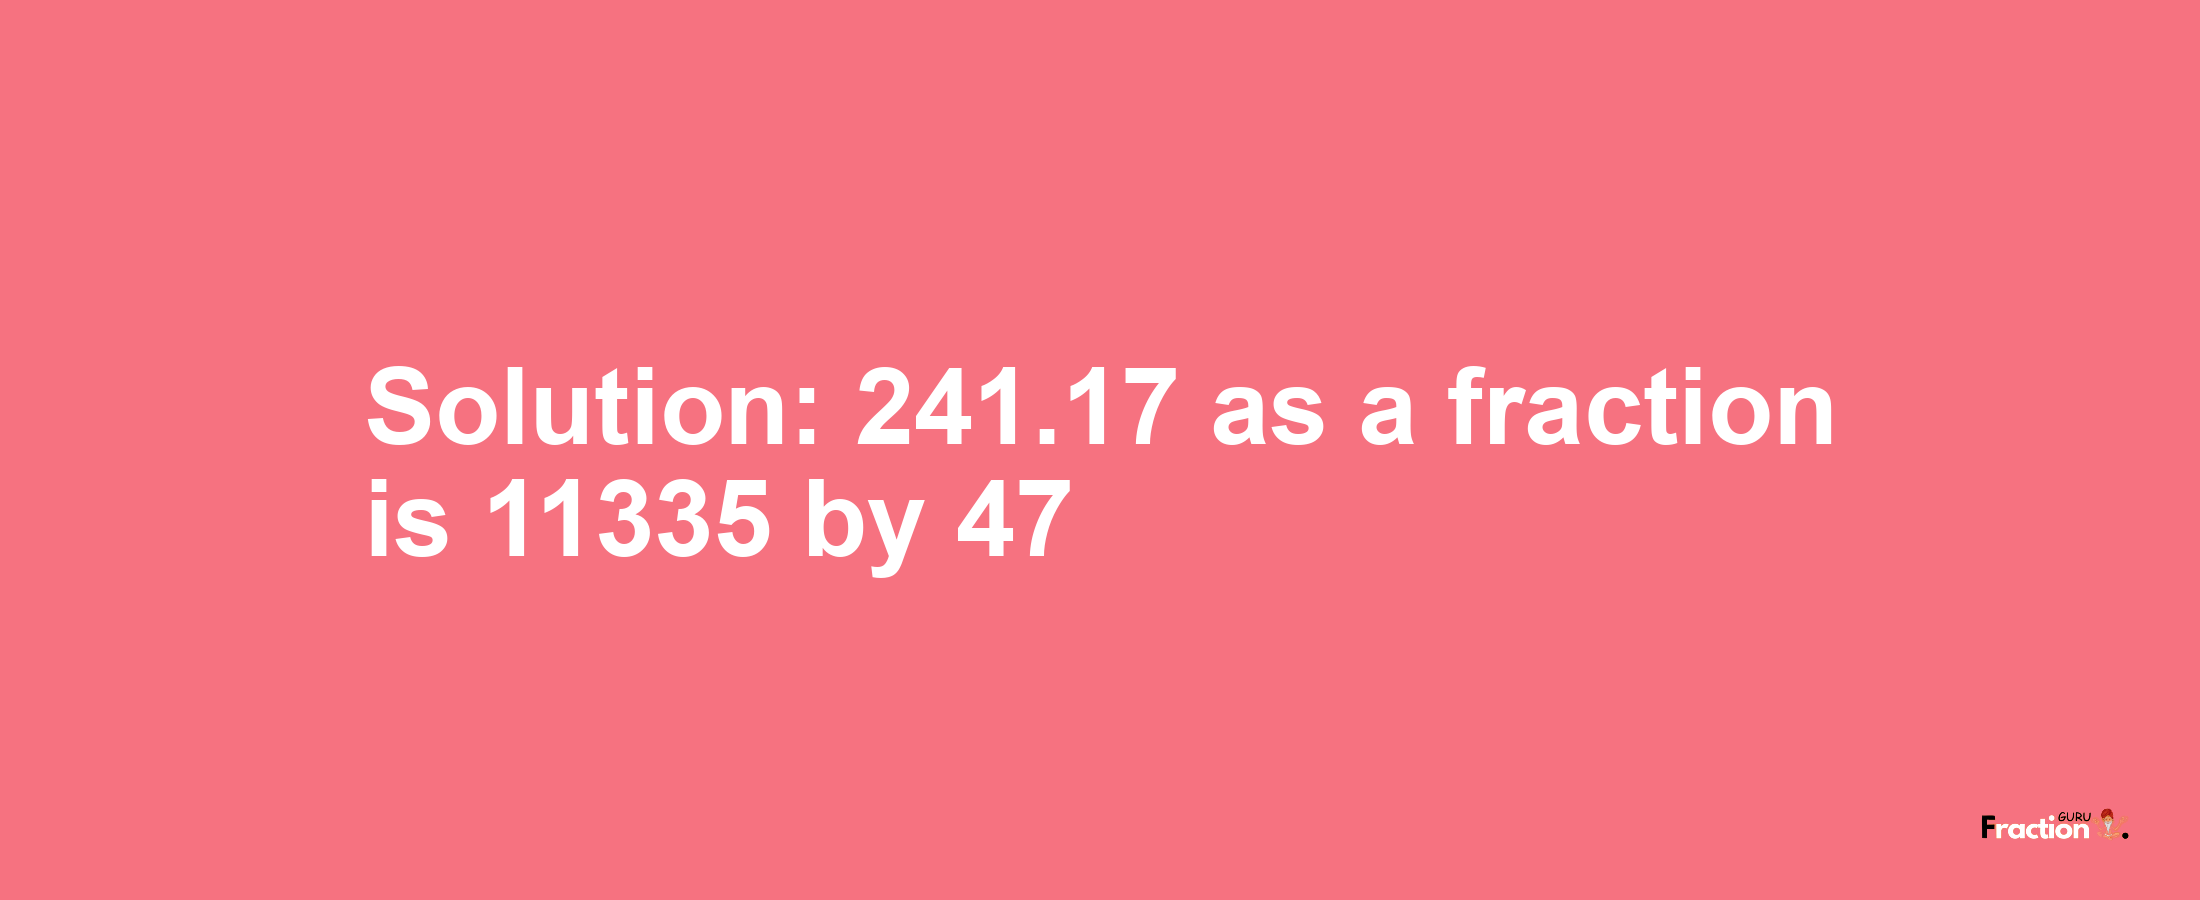 Solution:241.17 as a fraction is 11335/47